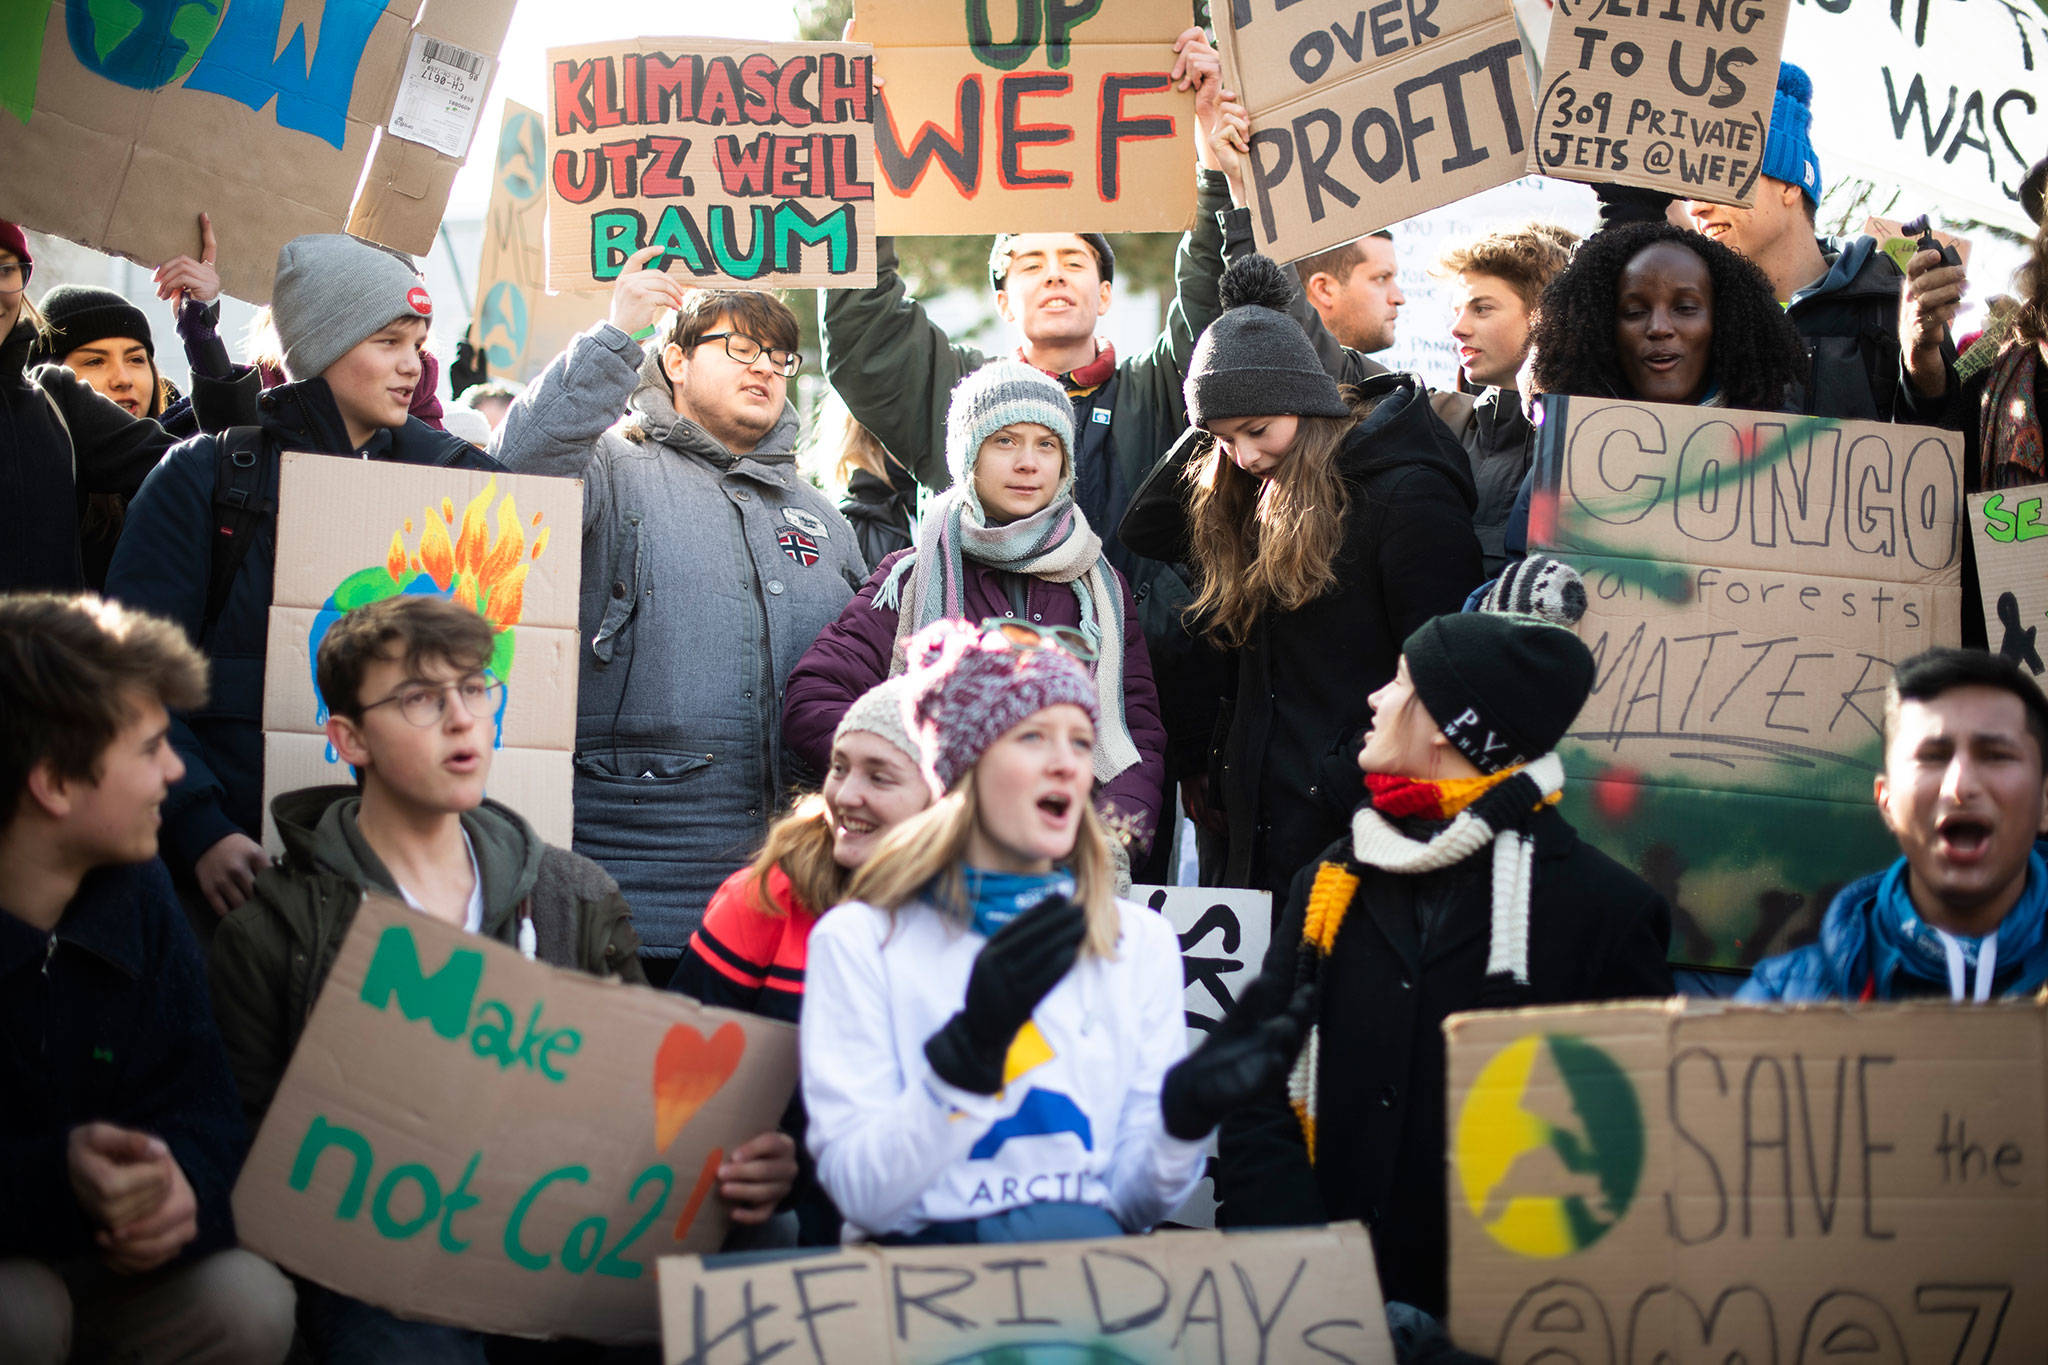 Swedish climate activist Greta Thunberg (center) joins a “Fridays for Future” demonstration on the final day of the 50th annual meeting of the World Economic Forum, WEF, in Davos, Switzerland on Friday. (Gian Ehrenzeller/Keystone via AP)